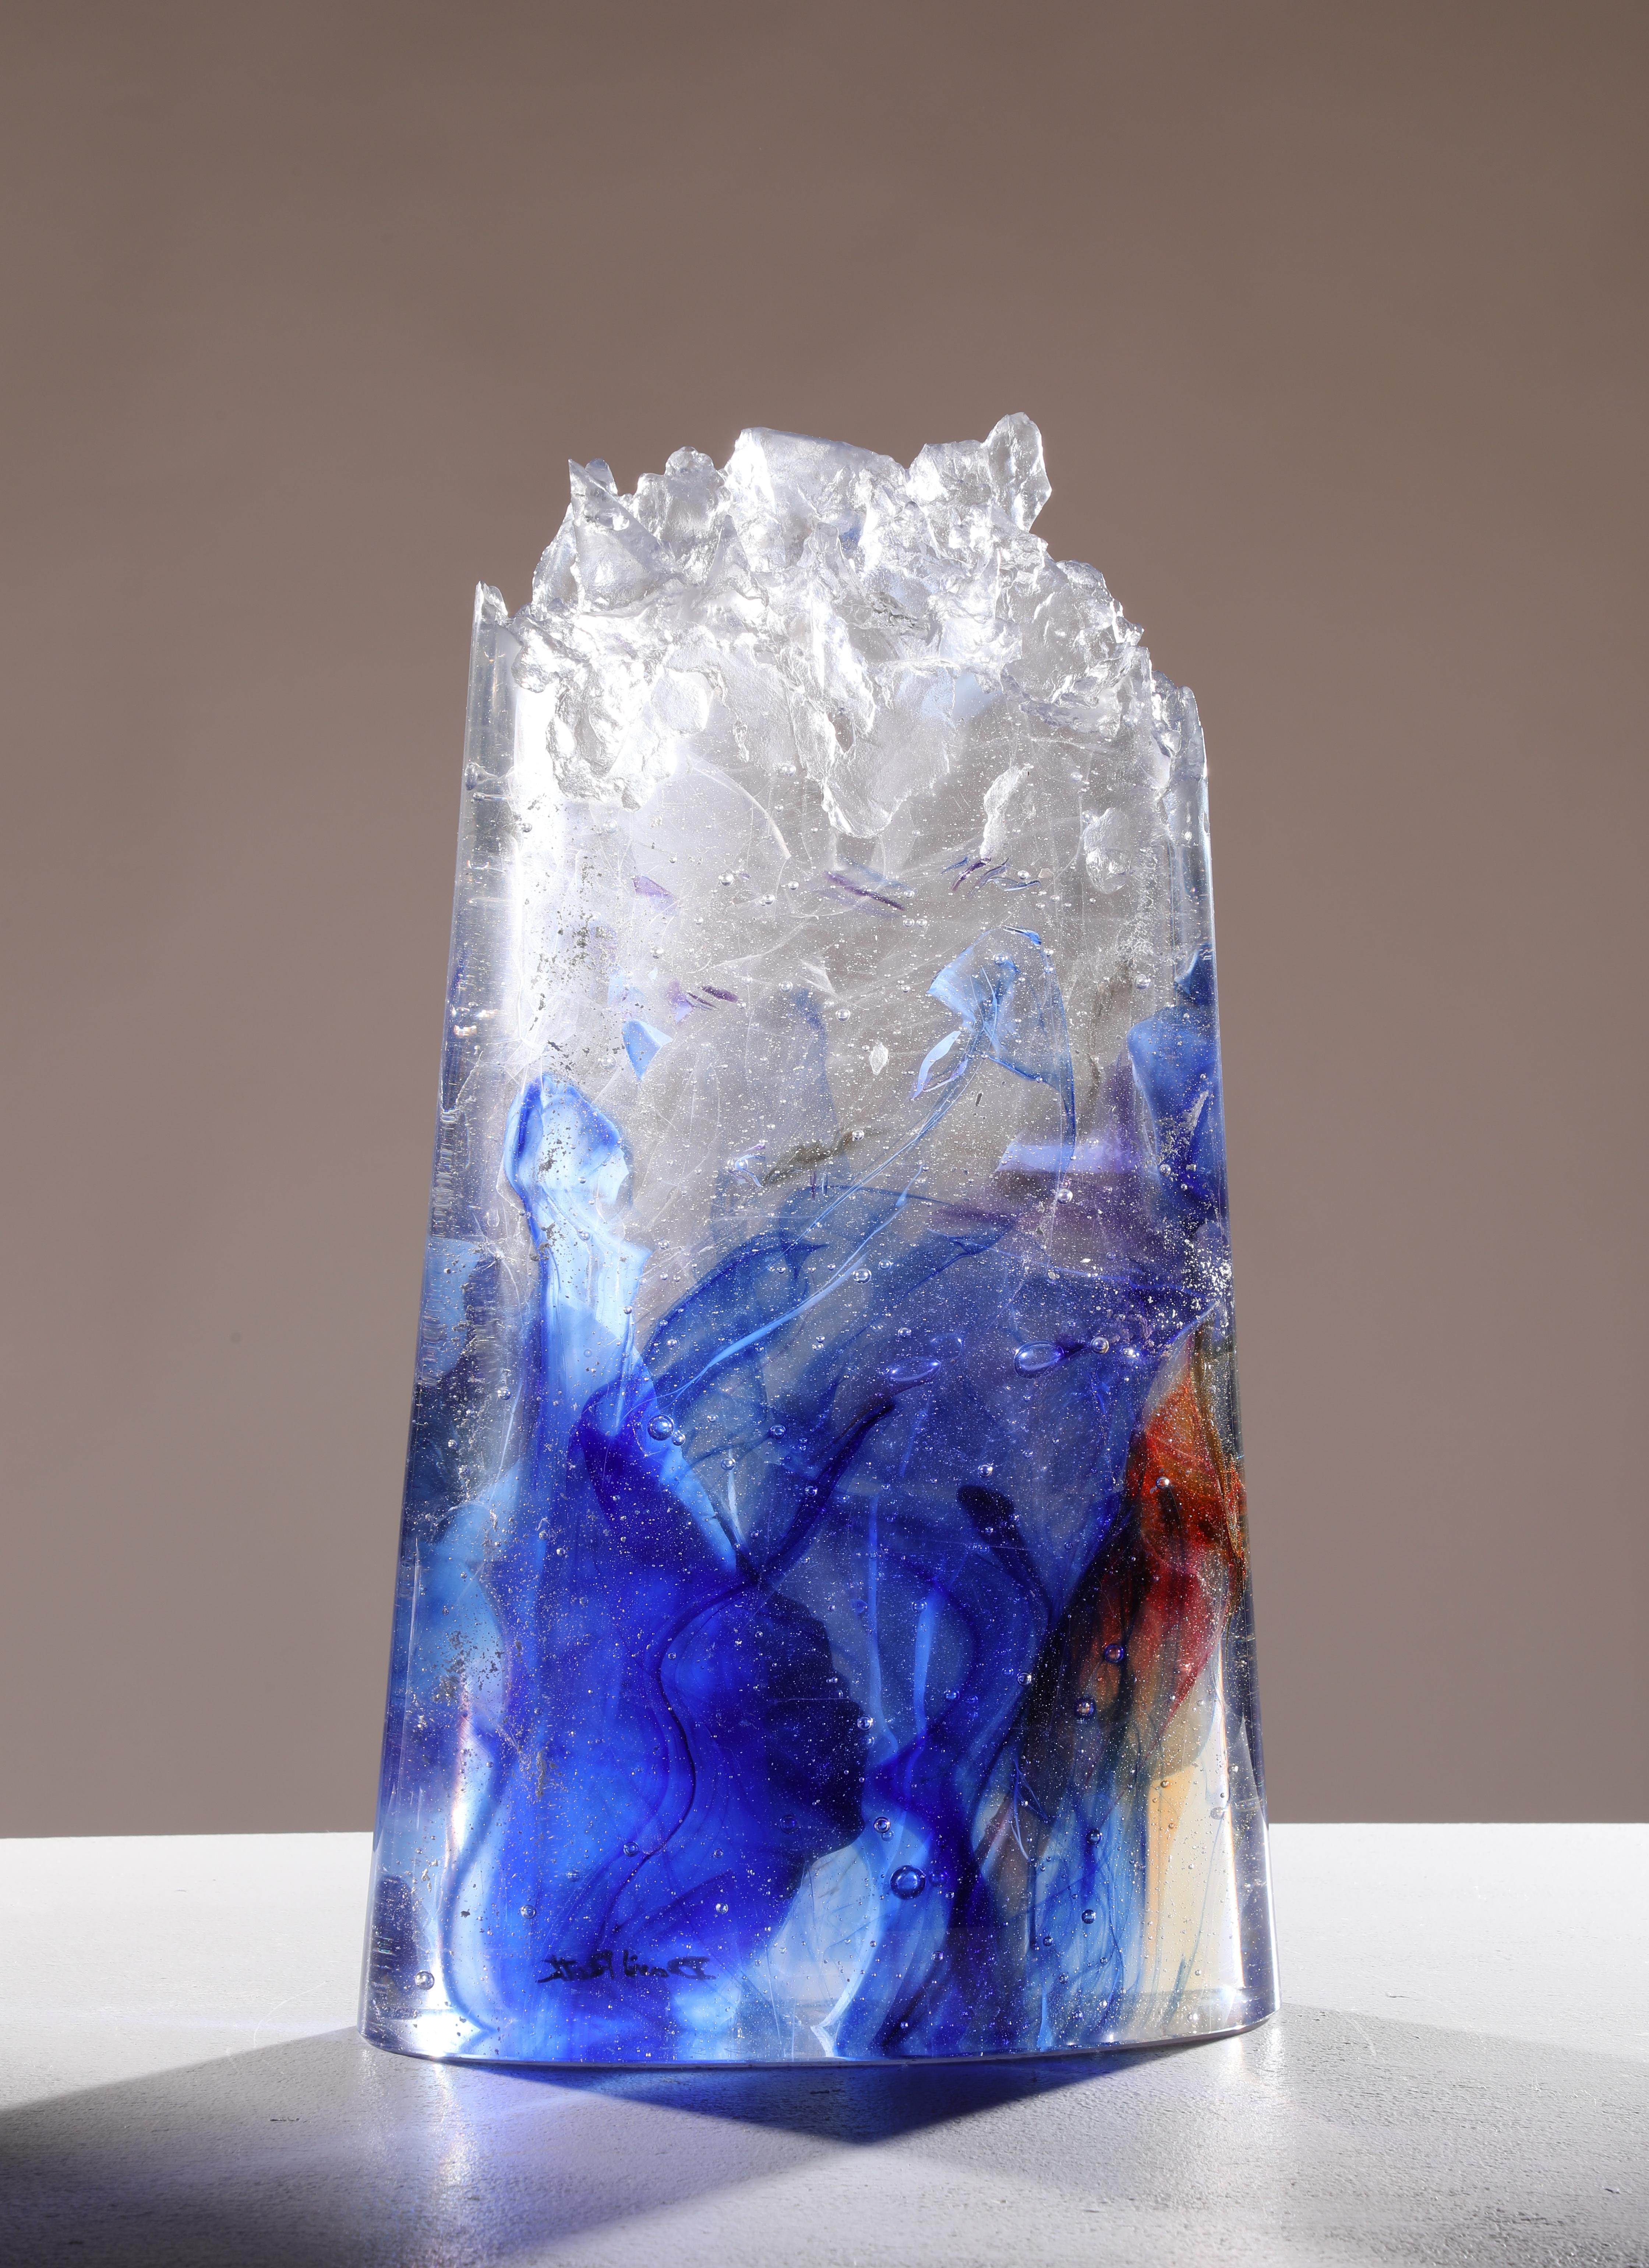 Abstract Cast Glass Sculpture, 'Rano Kau', 2014 by David Ruth For Sale 1